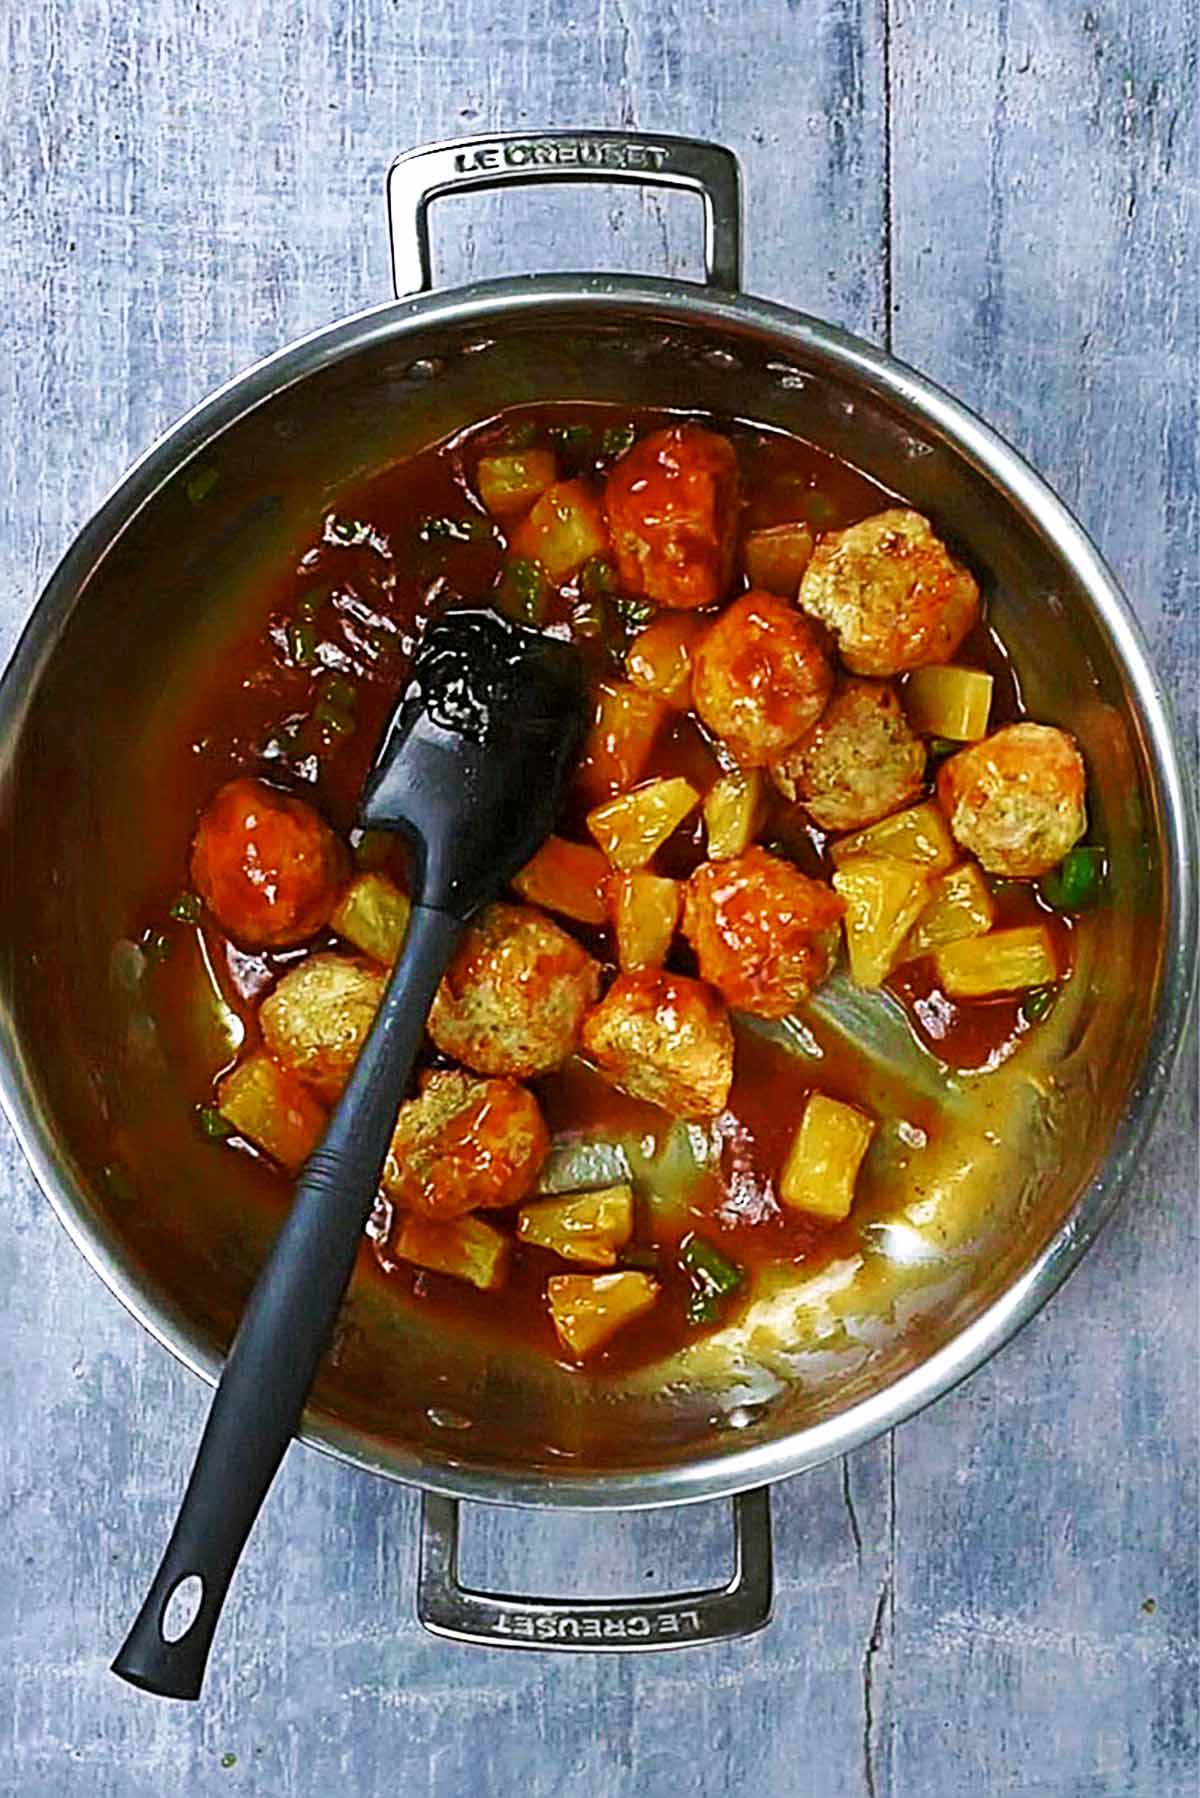 Meatballs, chopped peppers and pineapple chunks cooking in a sweet and sour sauce.